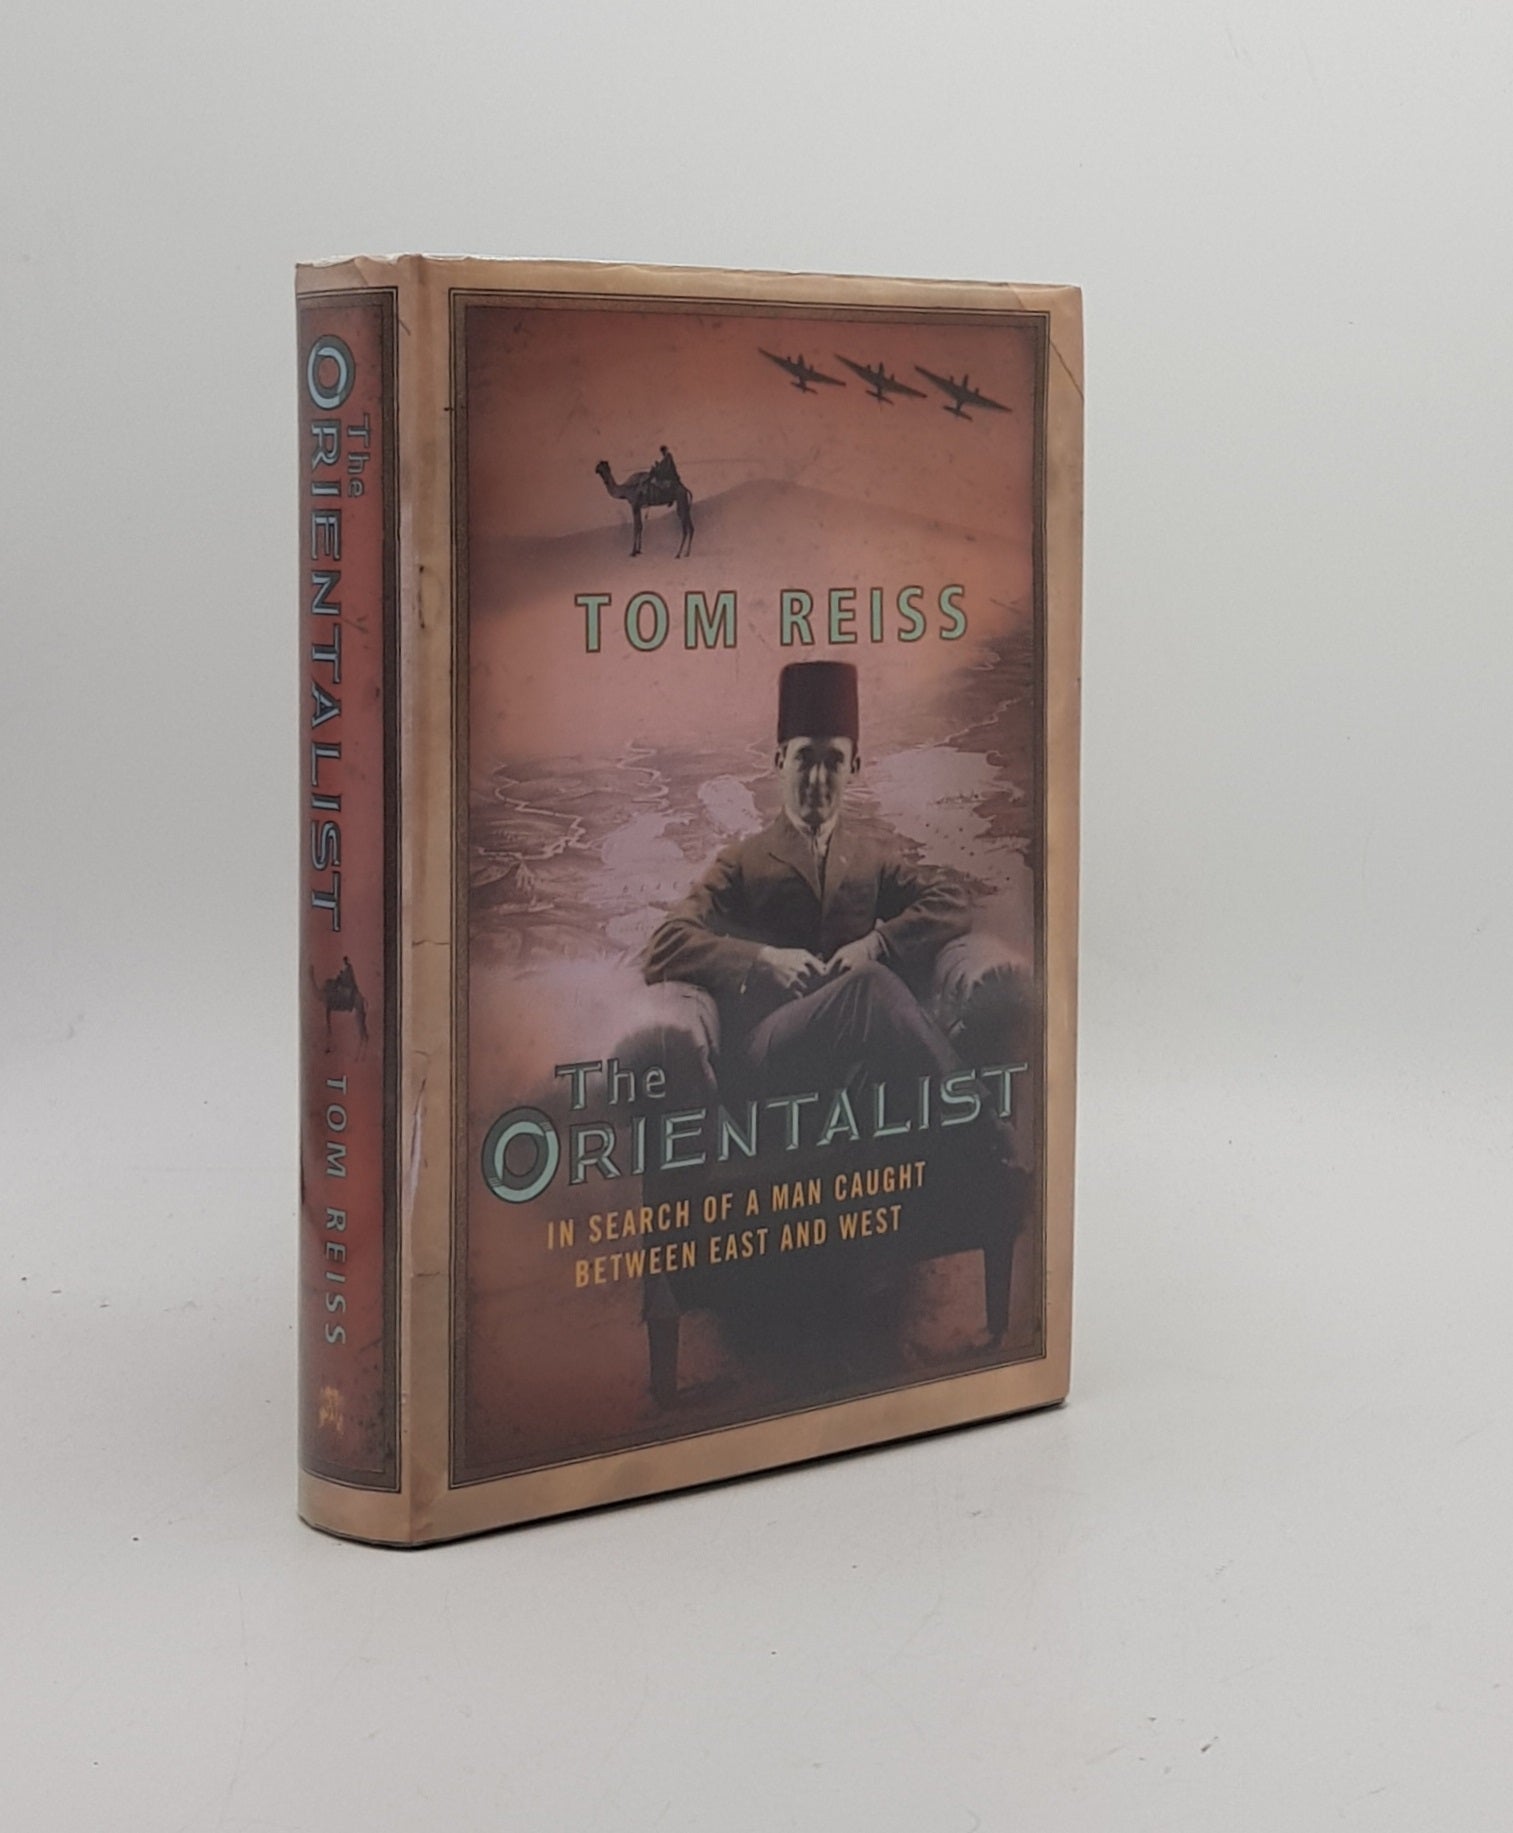 REISS Tom - The Orientalist in Search of a Man Caught between East and West